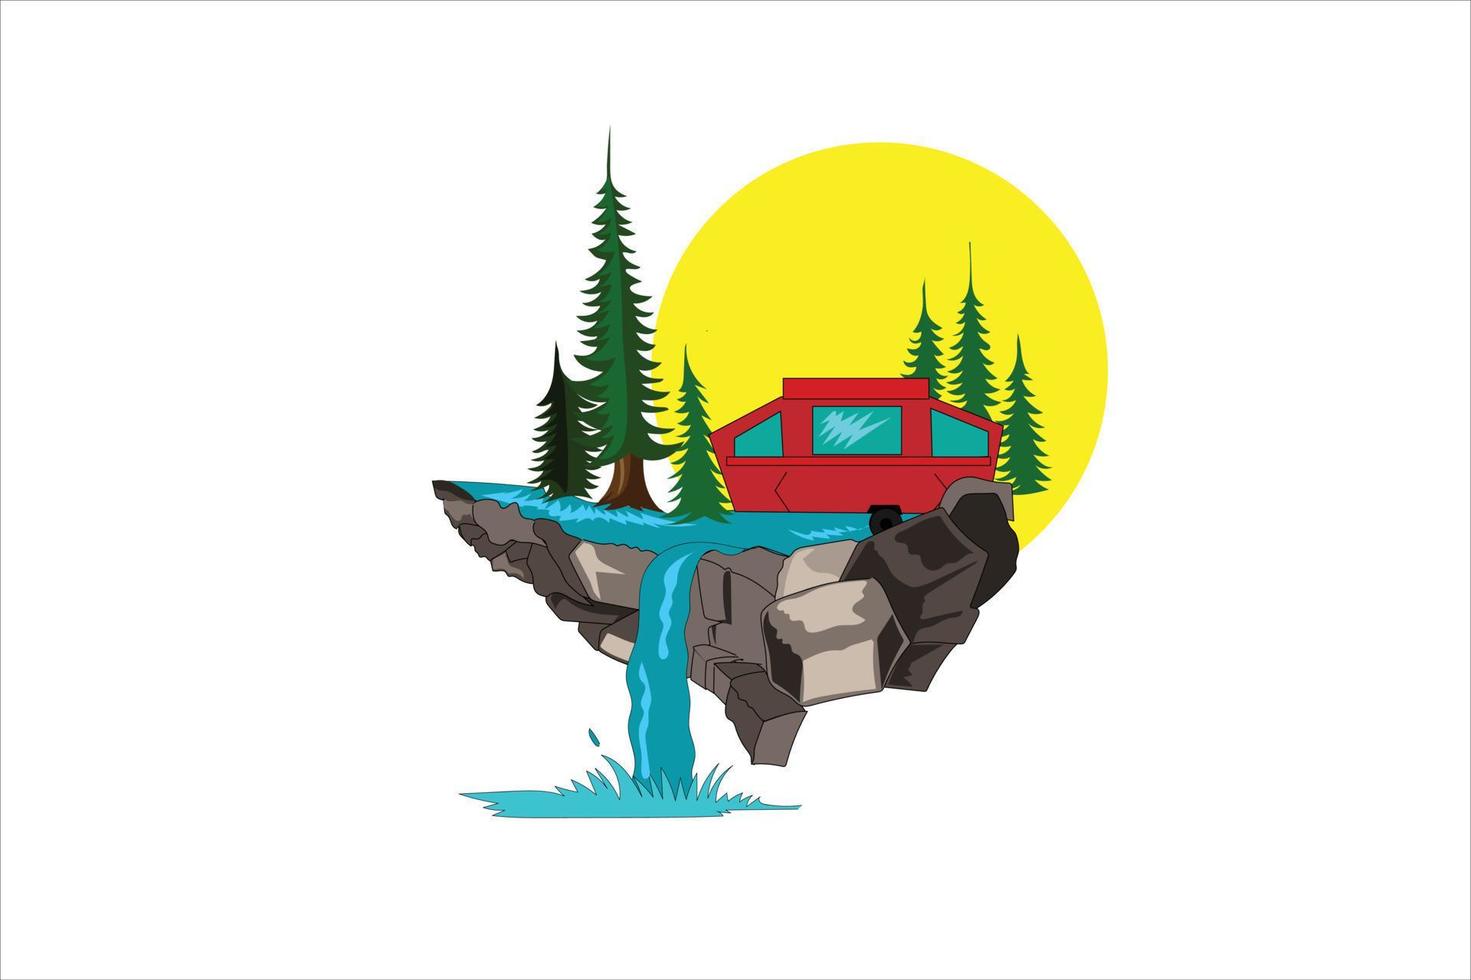 Camping illustration with summer forest cartoon style vector